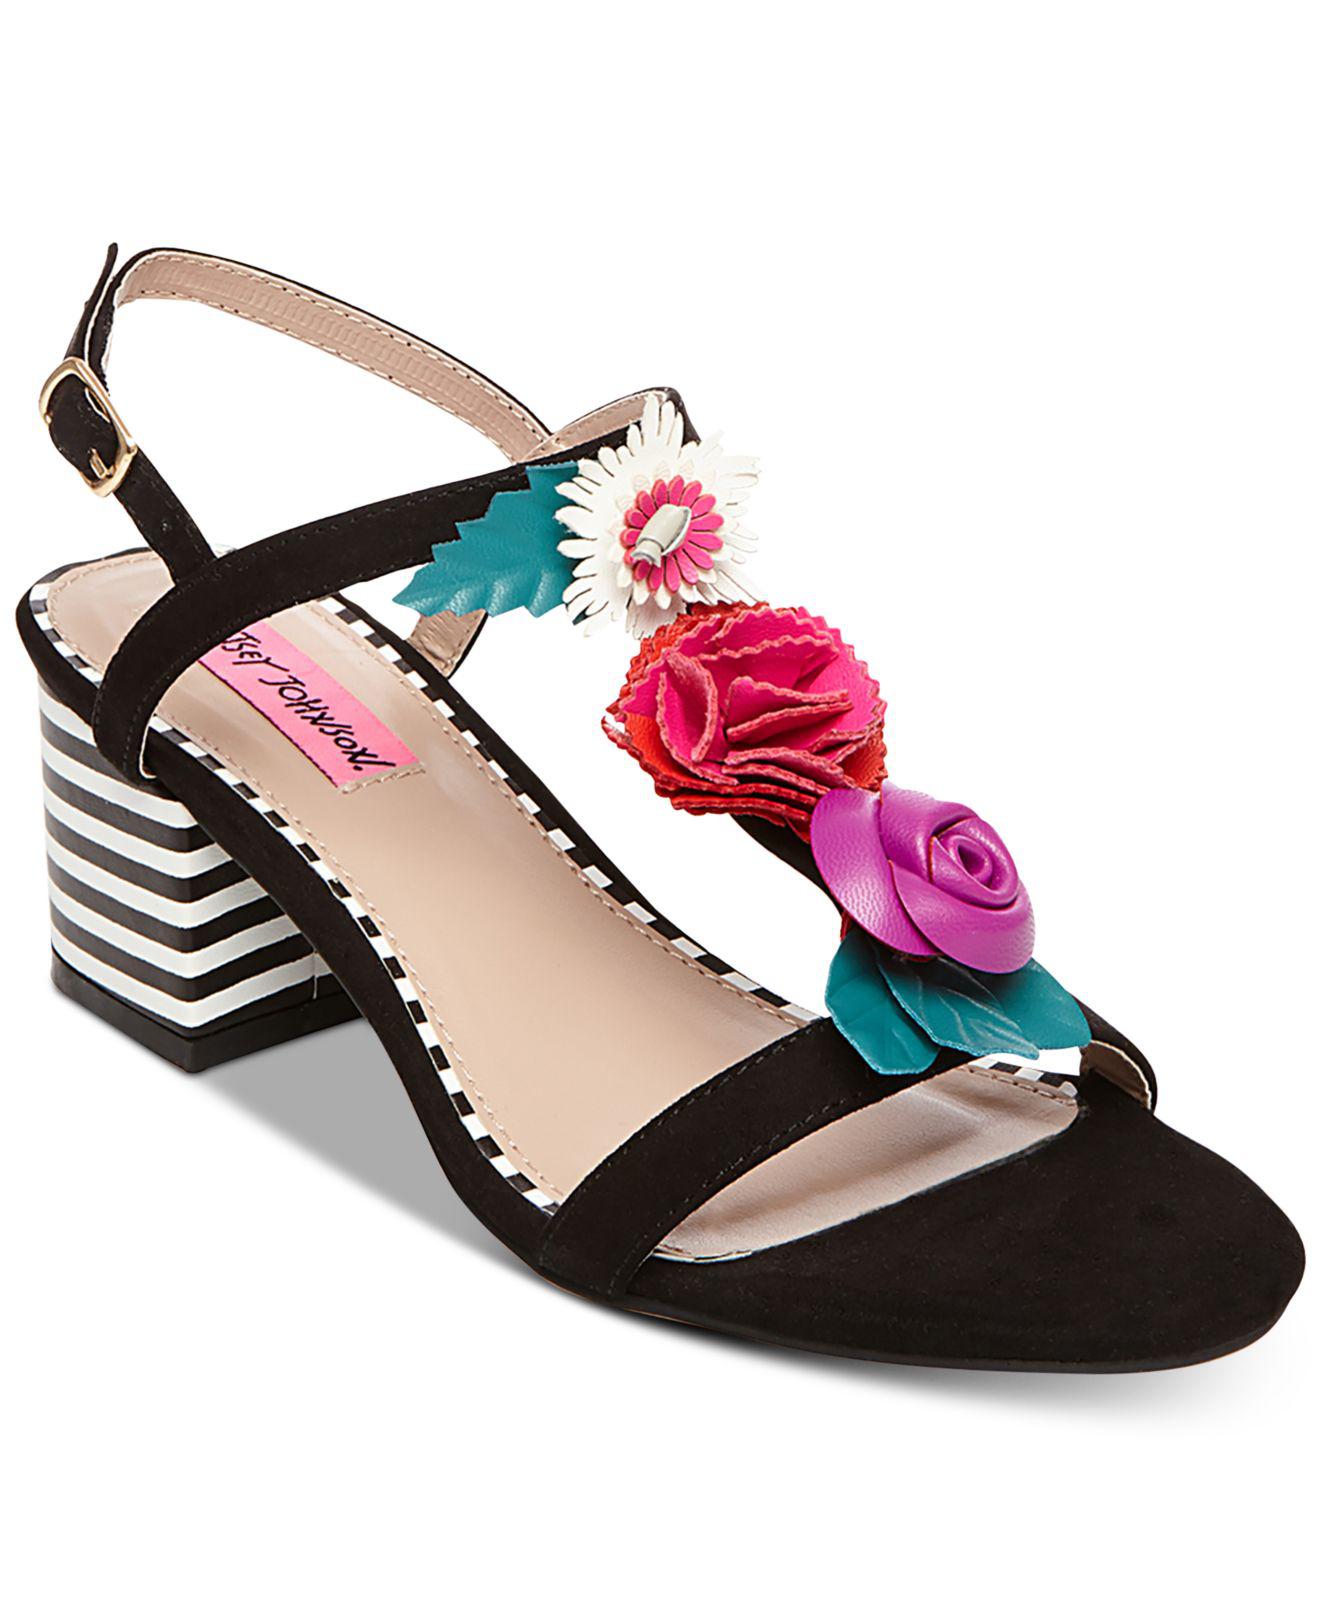 Betsey Johnson Andey Dress Sandals in Black | Lyst